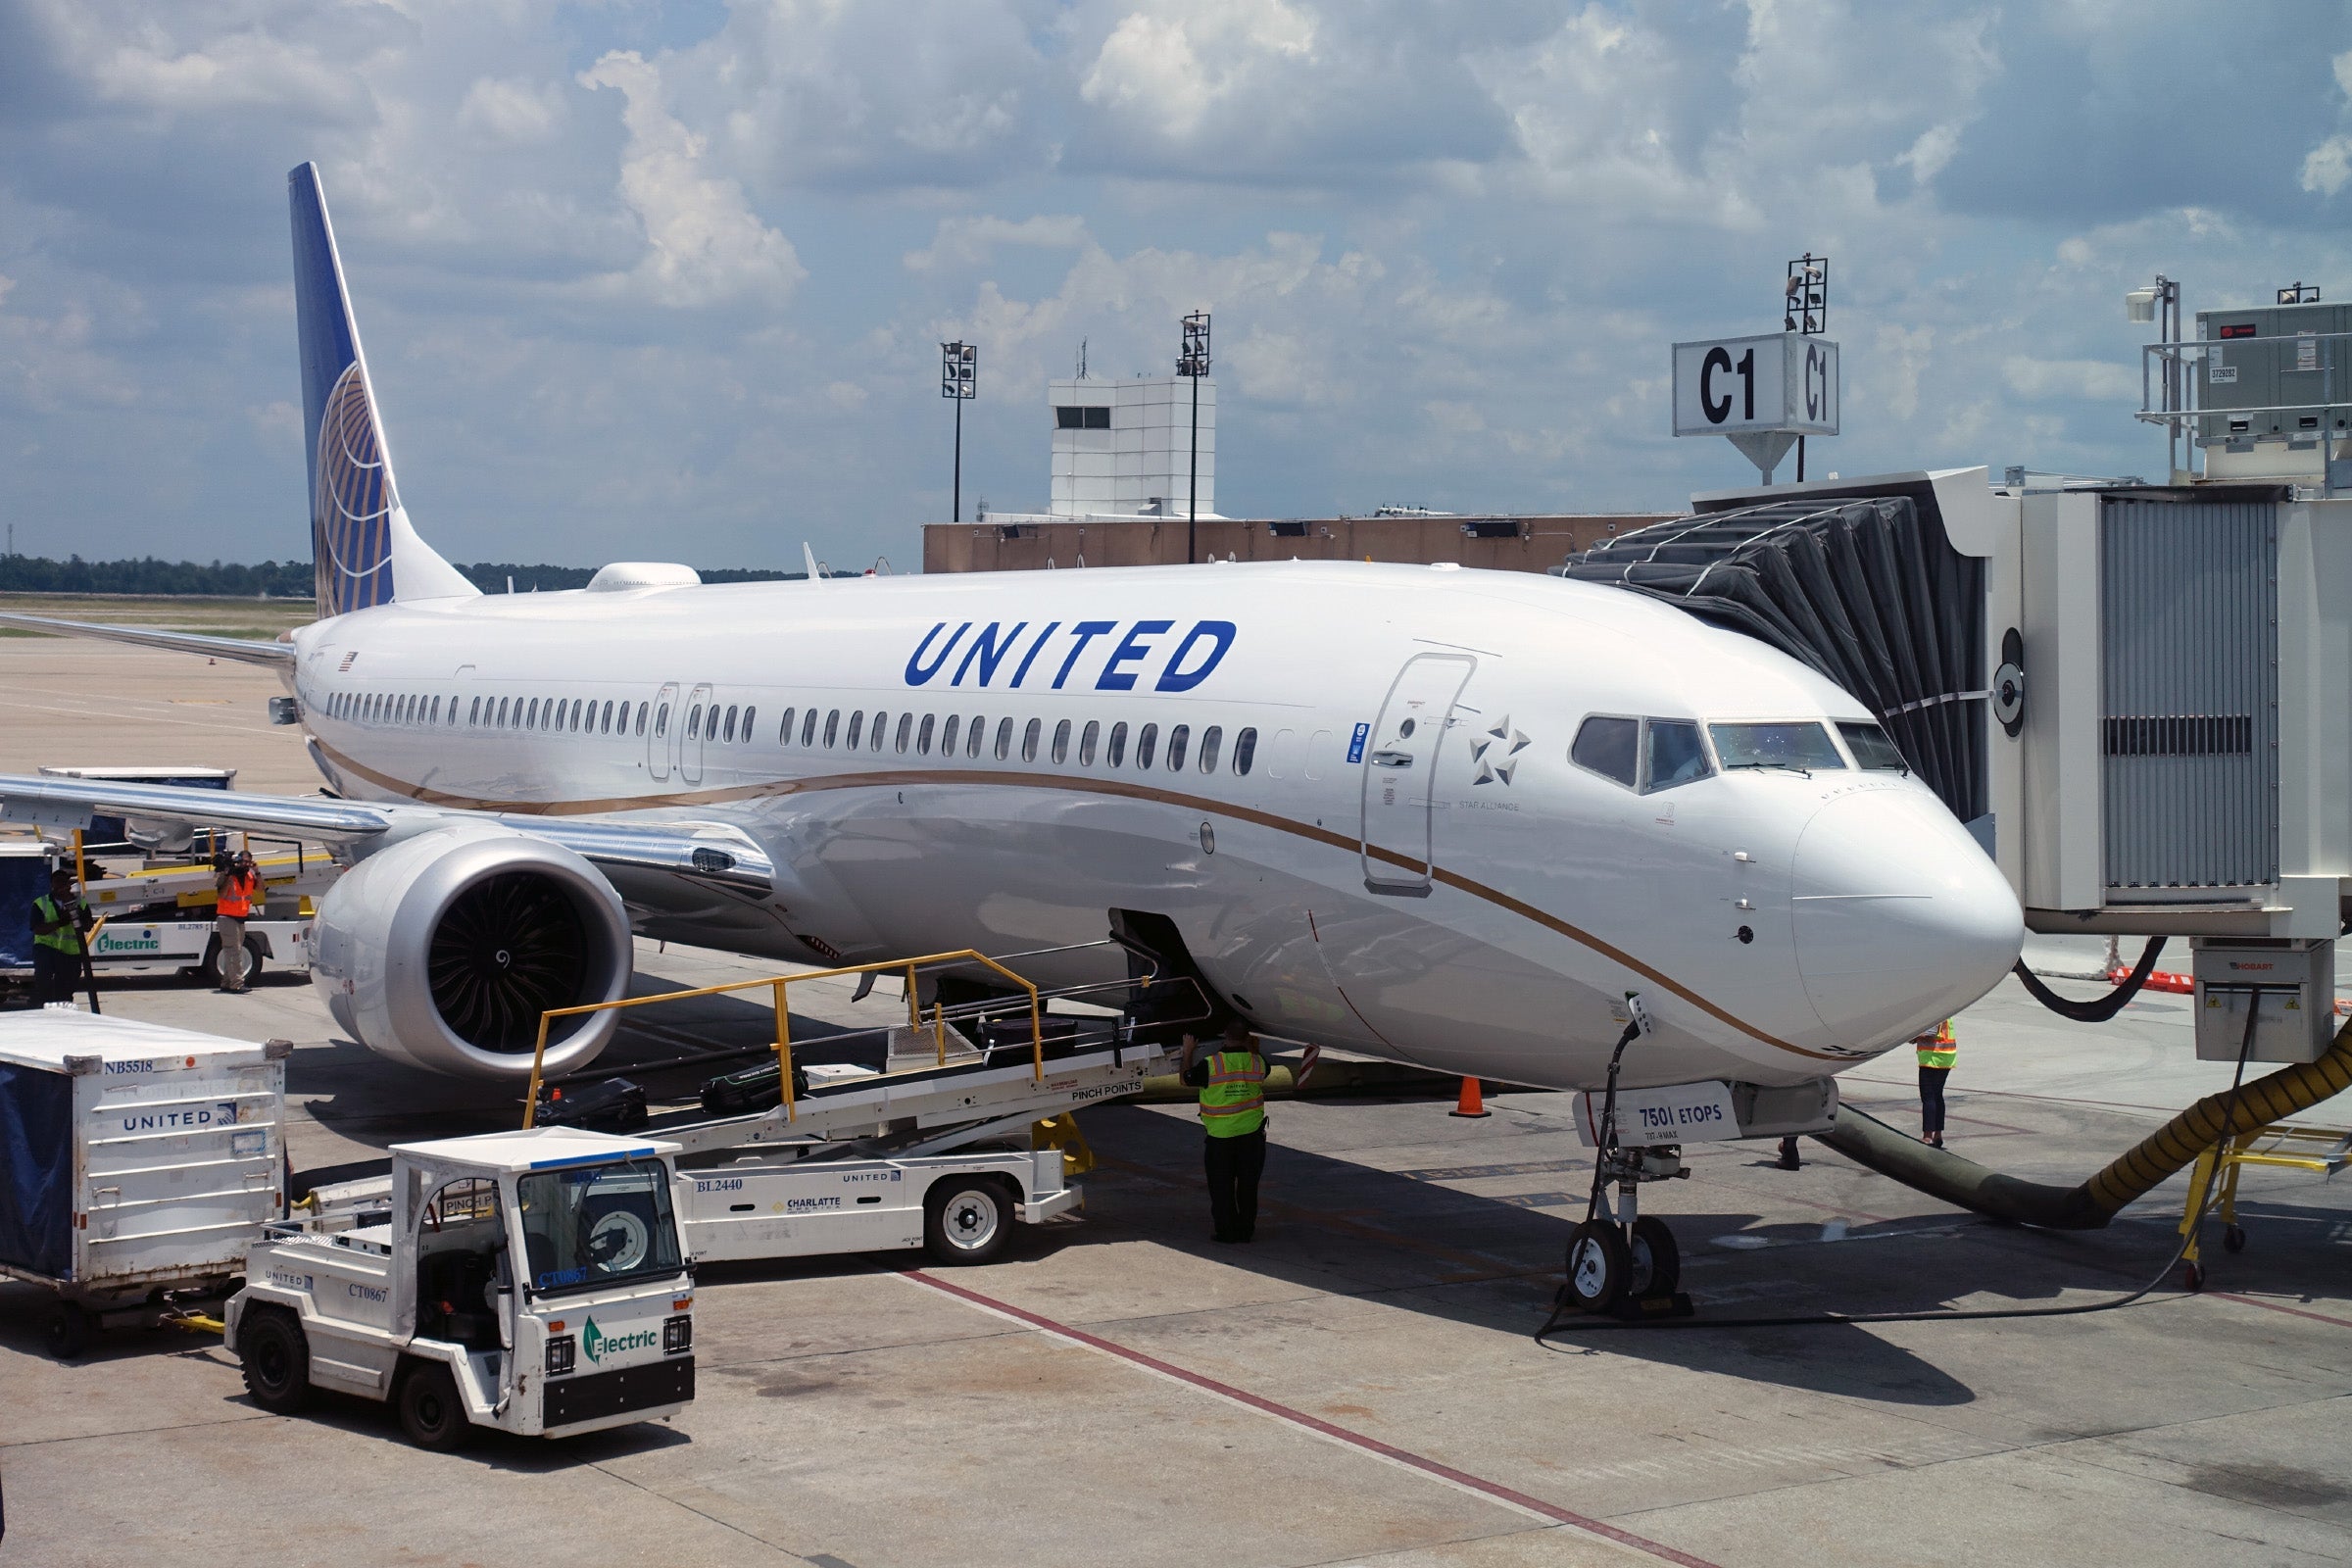 United 737 MAX 9 First Review